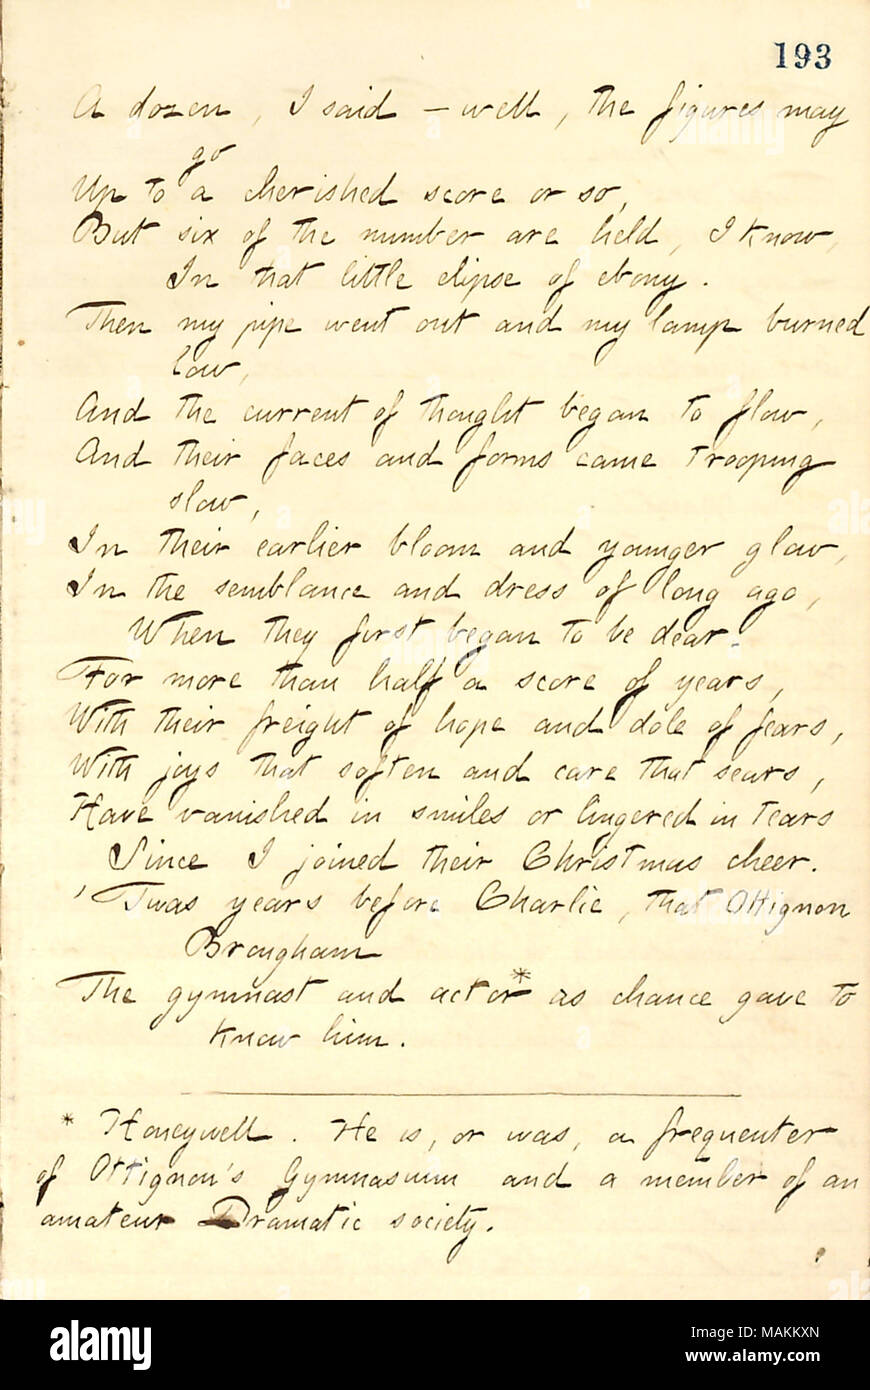 Jesse Haney's Christmas poem, which was read at the Edwards family's 1859 Christmas party.  Transcription: A dozen, I said  ? well, the figures may Go Up to a cherished score or so, But six of the number are held, I know, In that little elipse of ebony. Then my pipe went out and my lamp burned low, And the current of thought began to flow, And their faces and forms came trooping slow, In their earlier bloom and younger glow, In the semblance and dress of long ago, When they first began to be dear. For more than half a score of years, With their freight of hope and dole of fears, With joys that Stock Photo